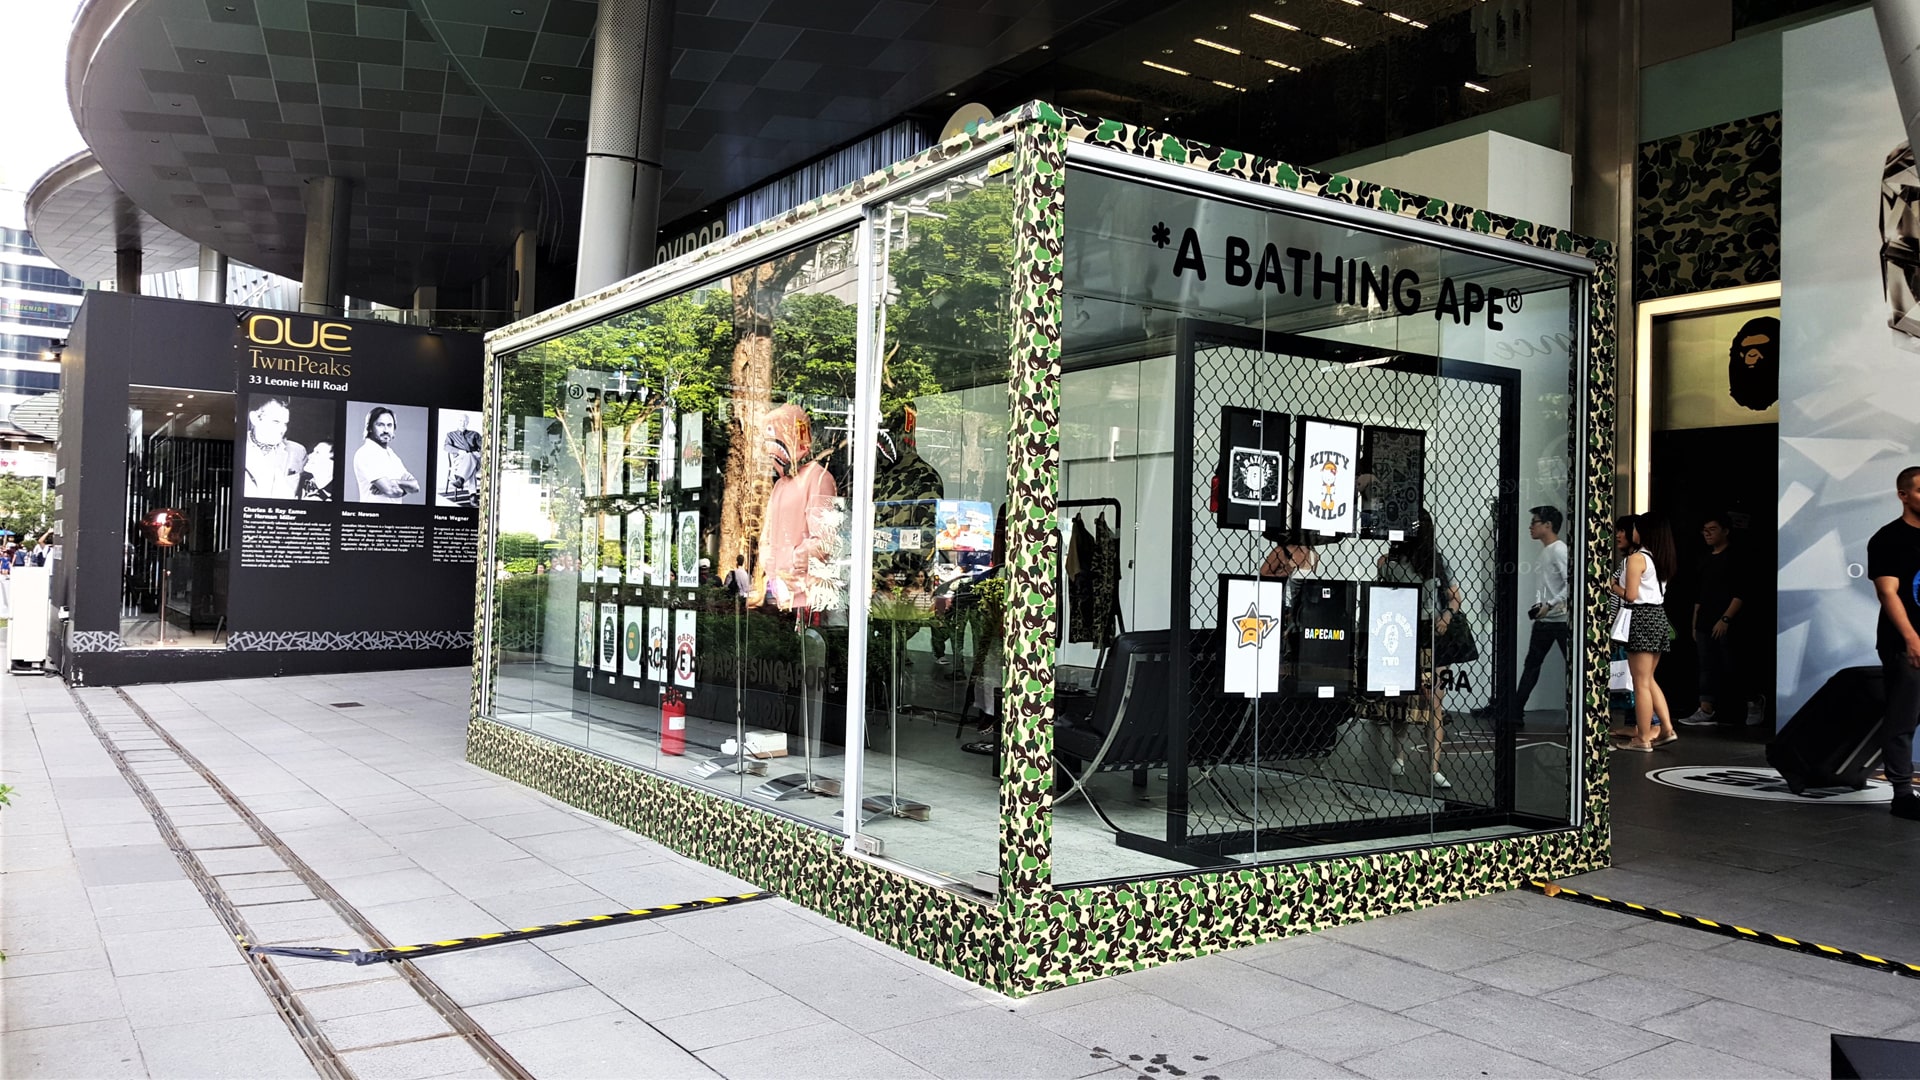 tsc_opt-images_tubelar-system_a-bathing-ape-popup-store-1920x1080-01-min